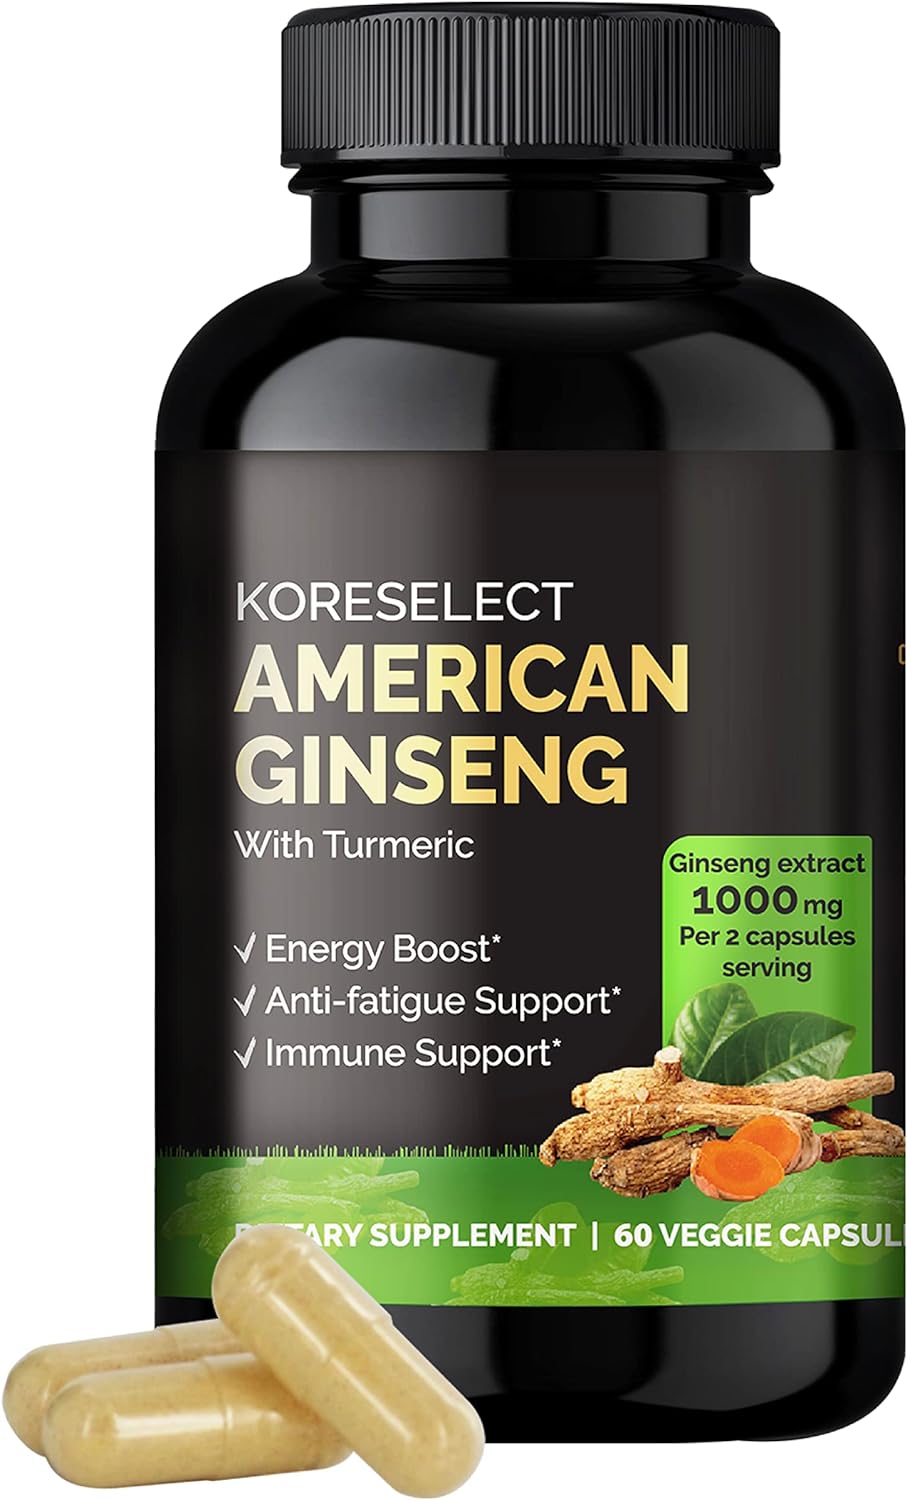 American Ginseng Capsules - 1000 mg American Ginseng Extract for Pre Workout, Energy & Immune Support Ginseng Supplement with Turmeric Extract - 60 Capsules?